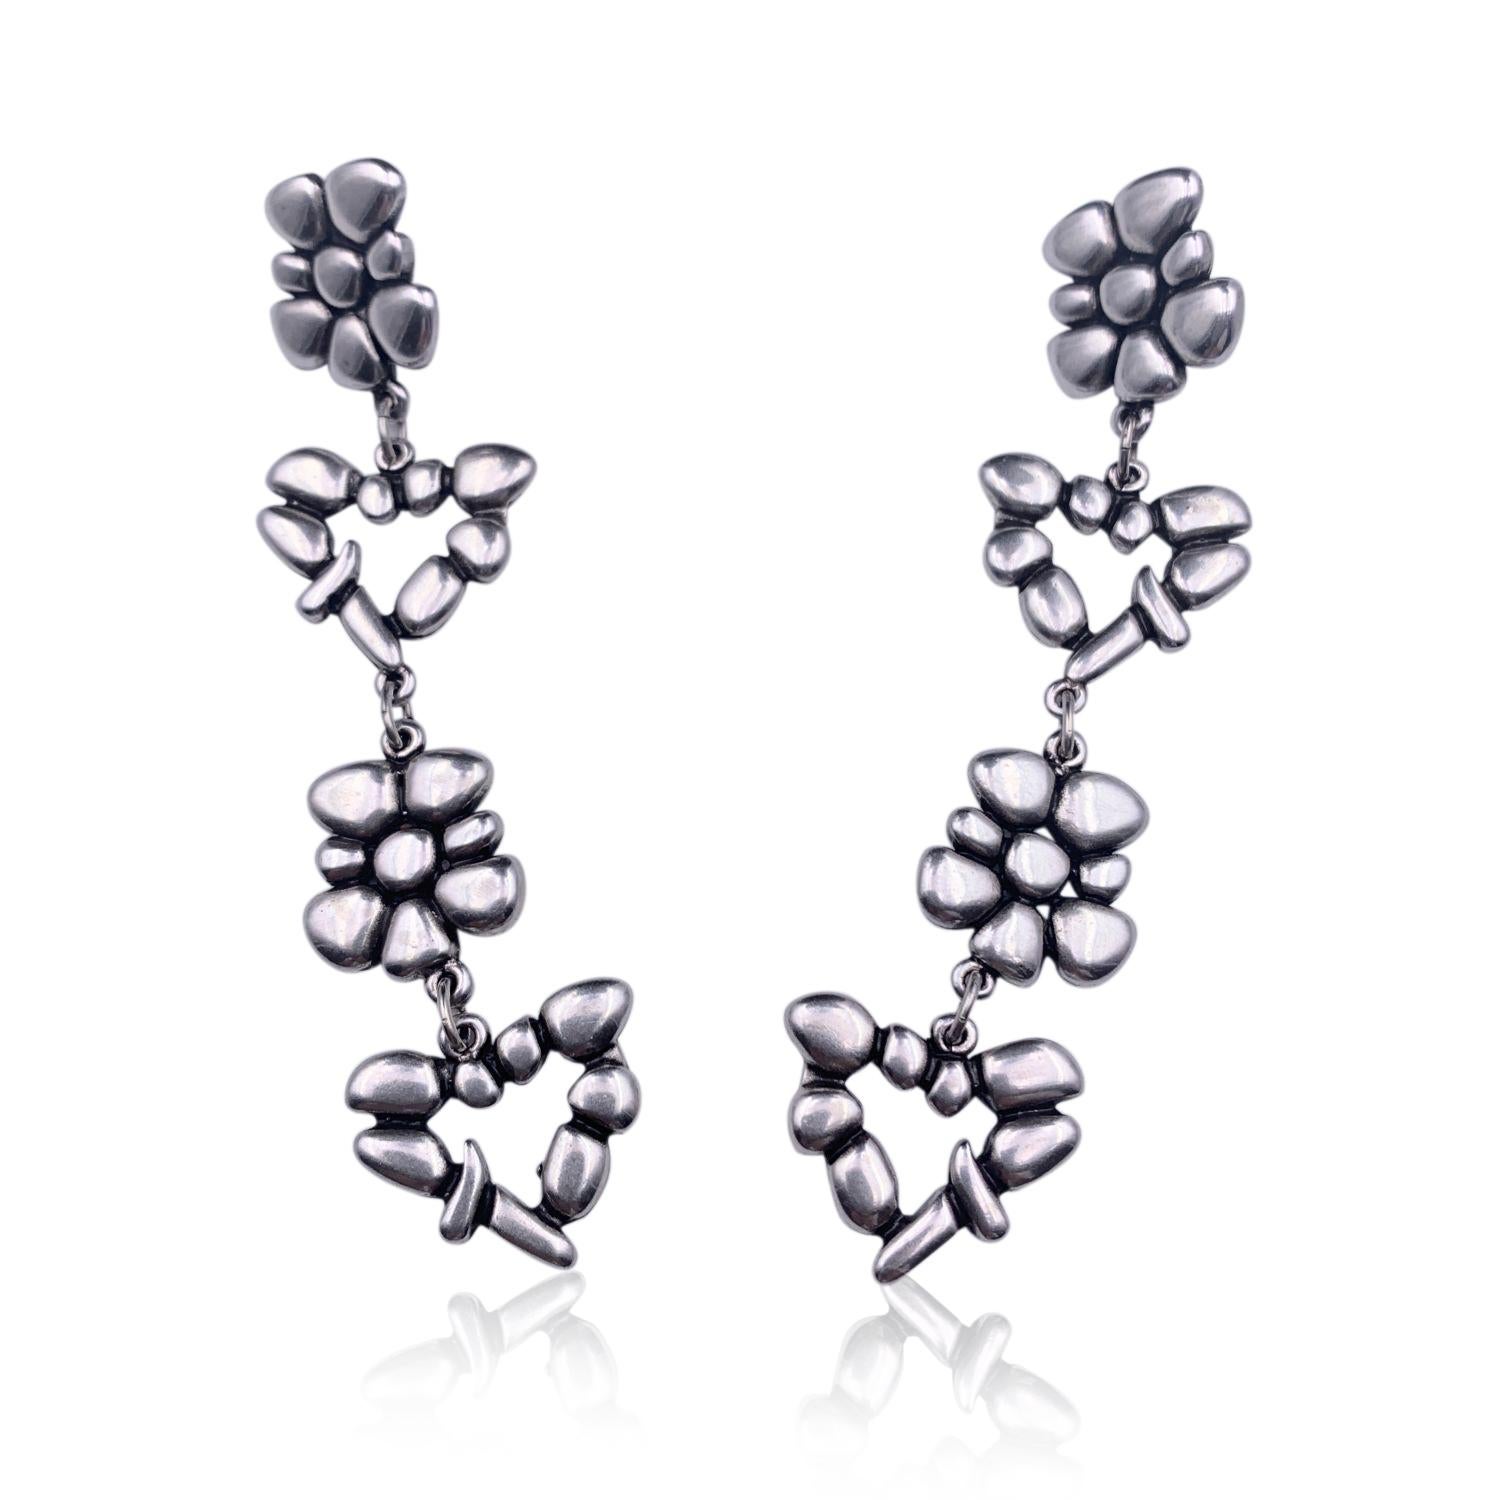 Beautiful earrings by Christian Lacroix, from the love story line. Made in silver-tone metal with hearts and flowers pendant. For pierced ears. Length: 4 inches - 10.2 cm. 'Christian Lacroix Paris' signature engraved on the reverse of the